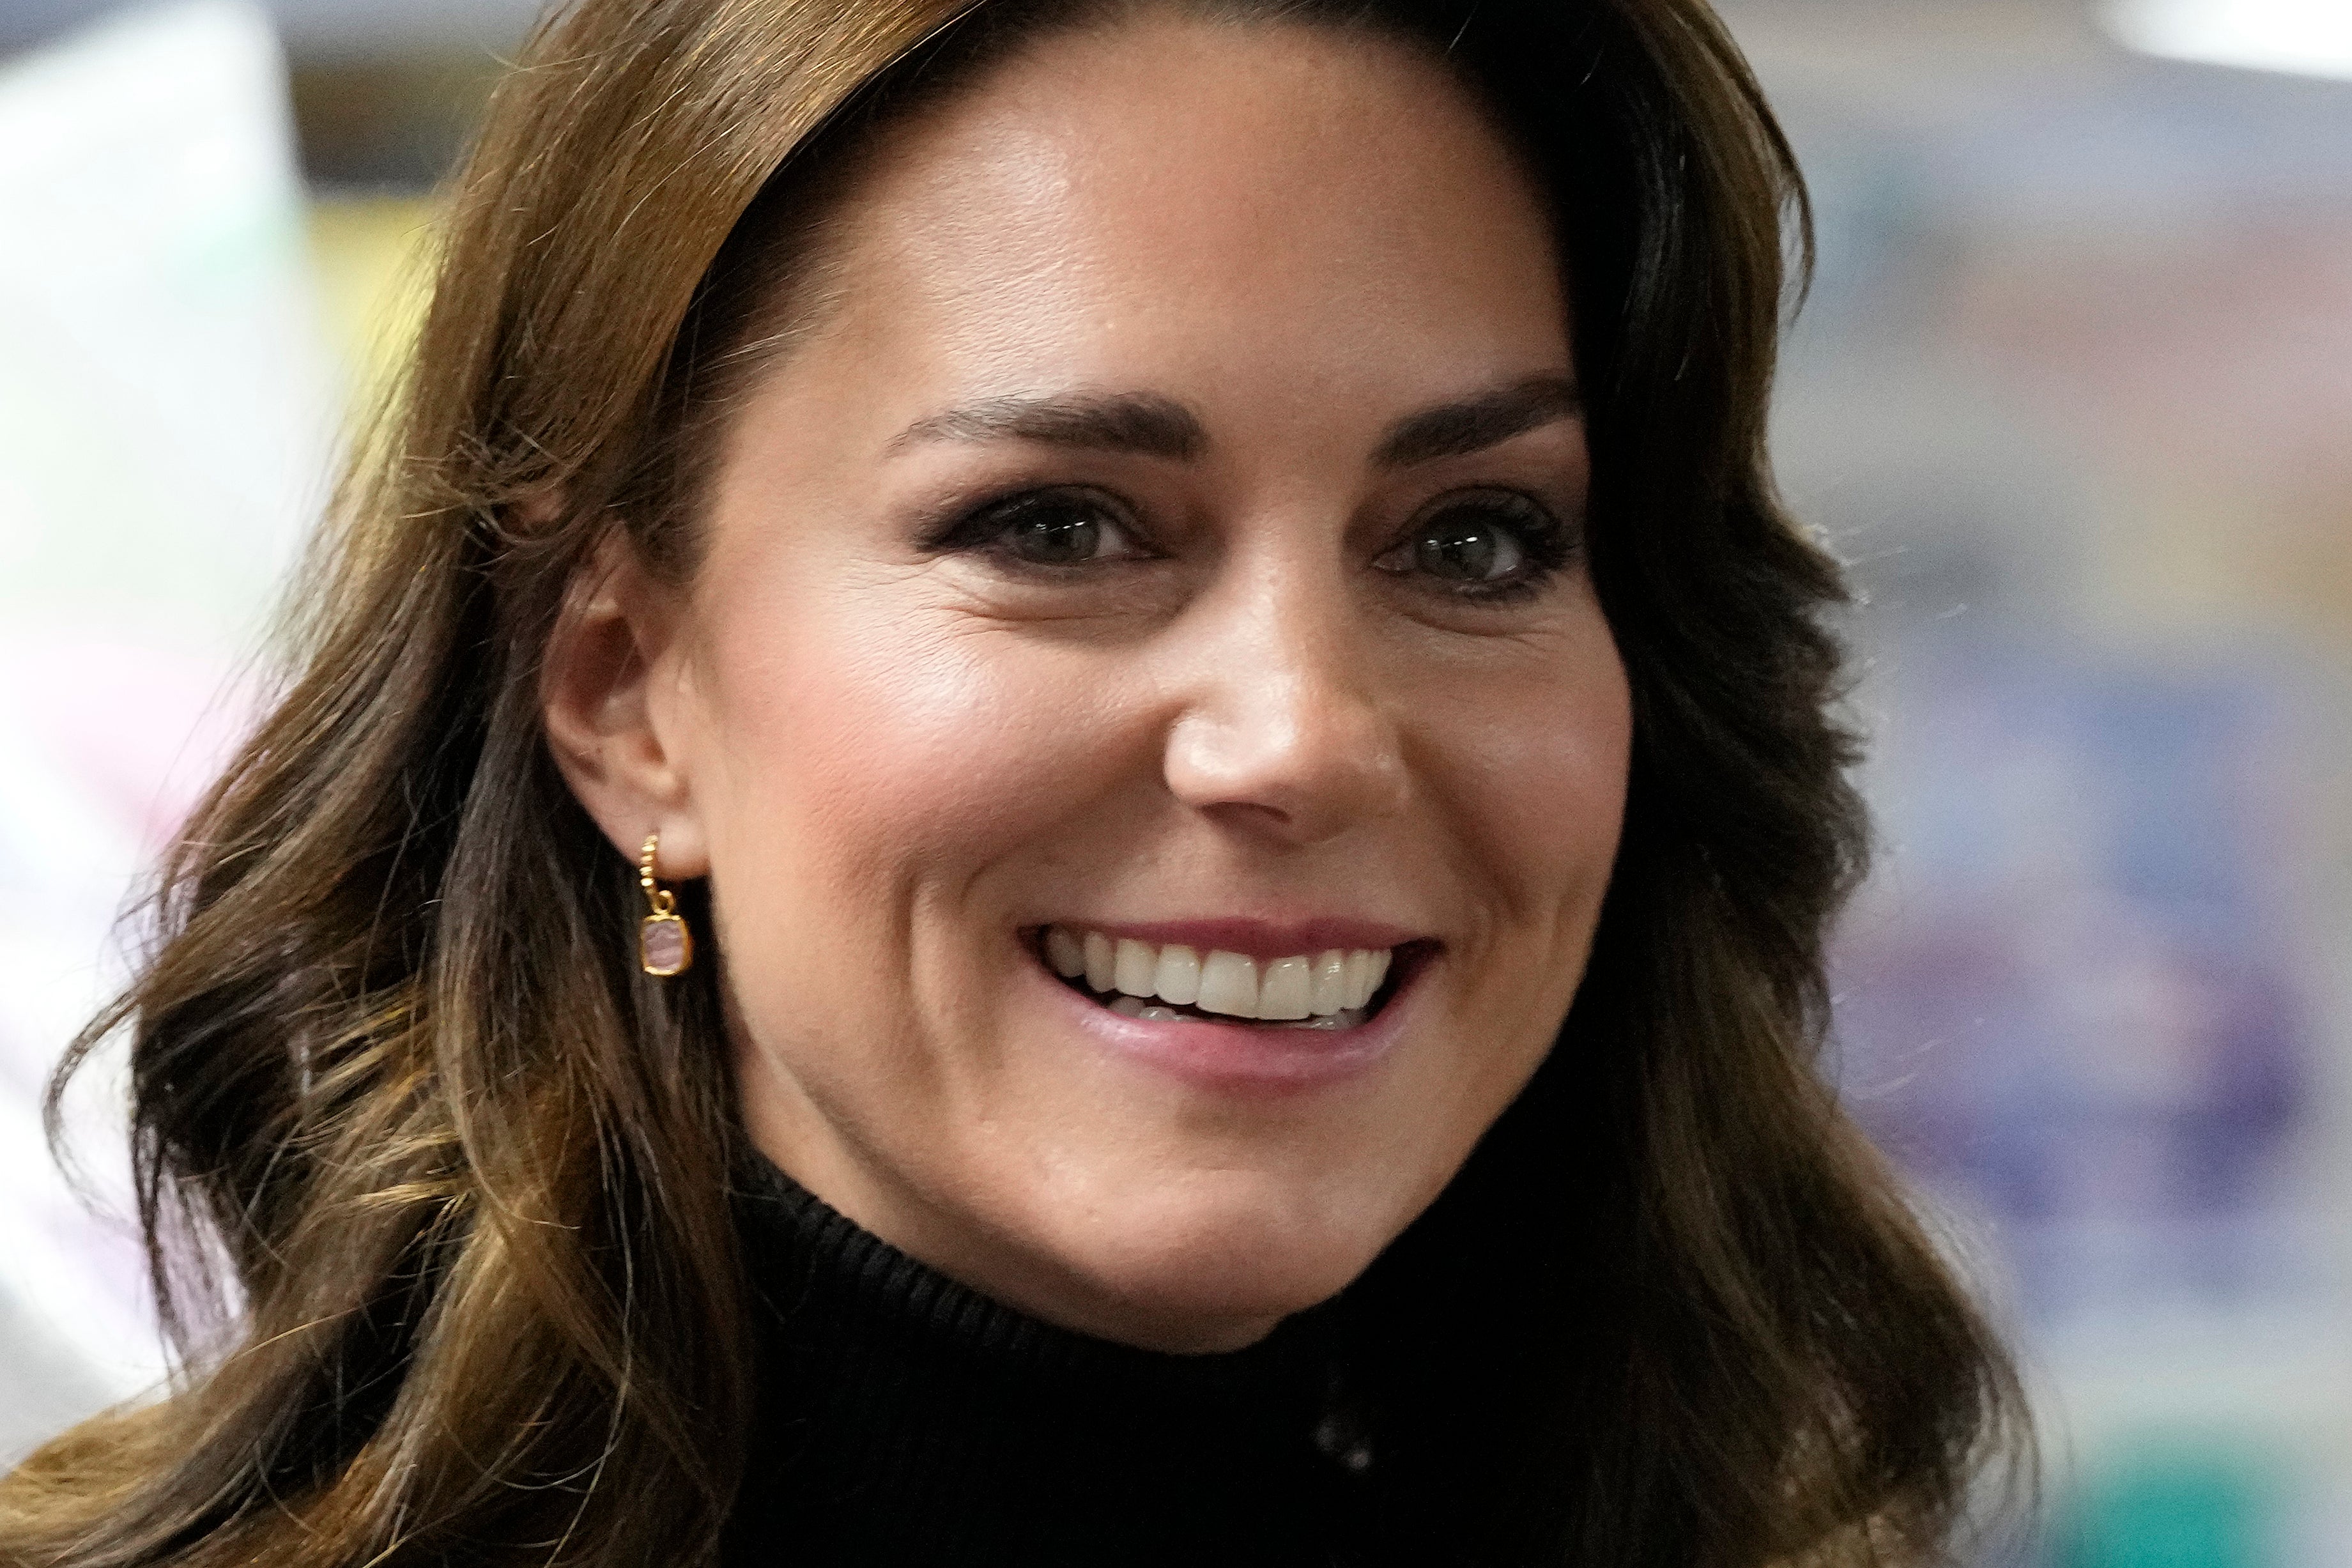 Kensington Palace said on Friday that the Princess was still ‘doing well’ while she recovers from abdominal surgery